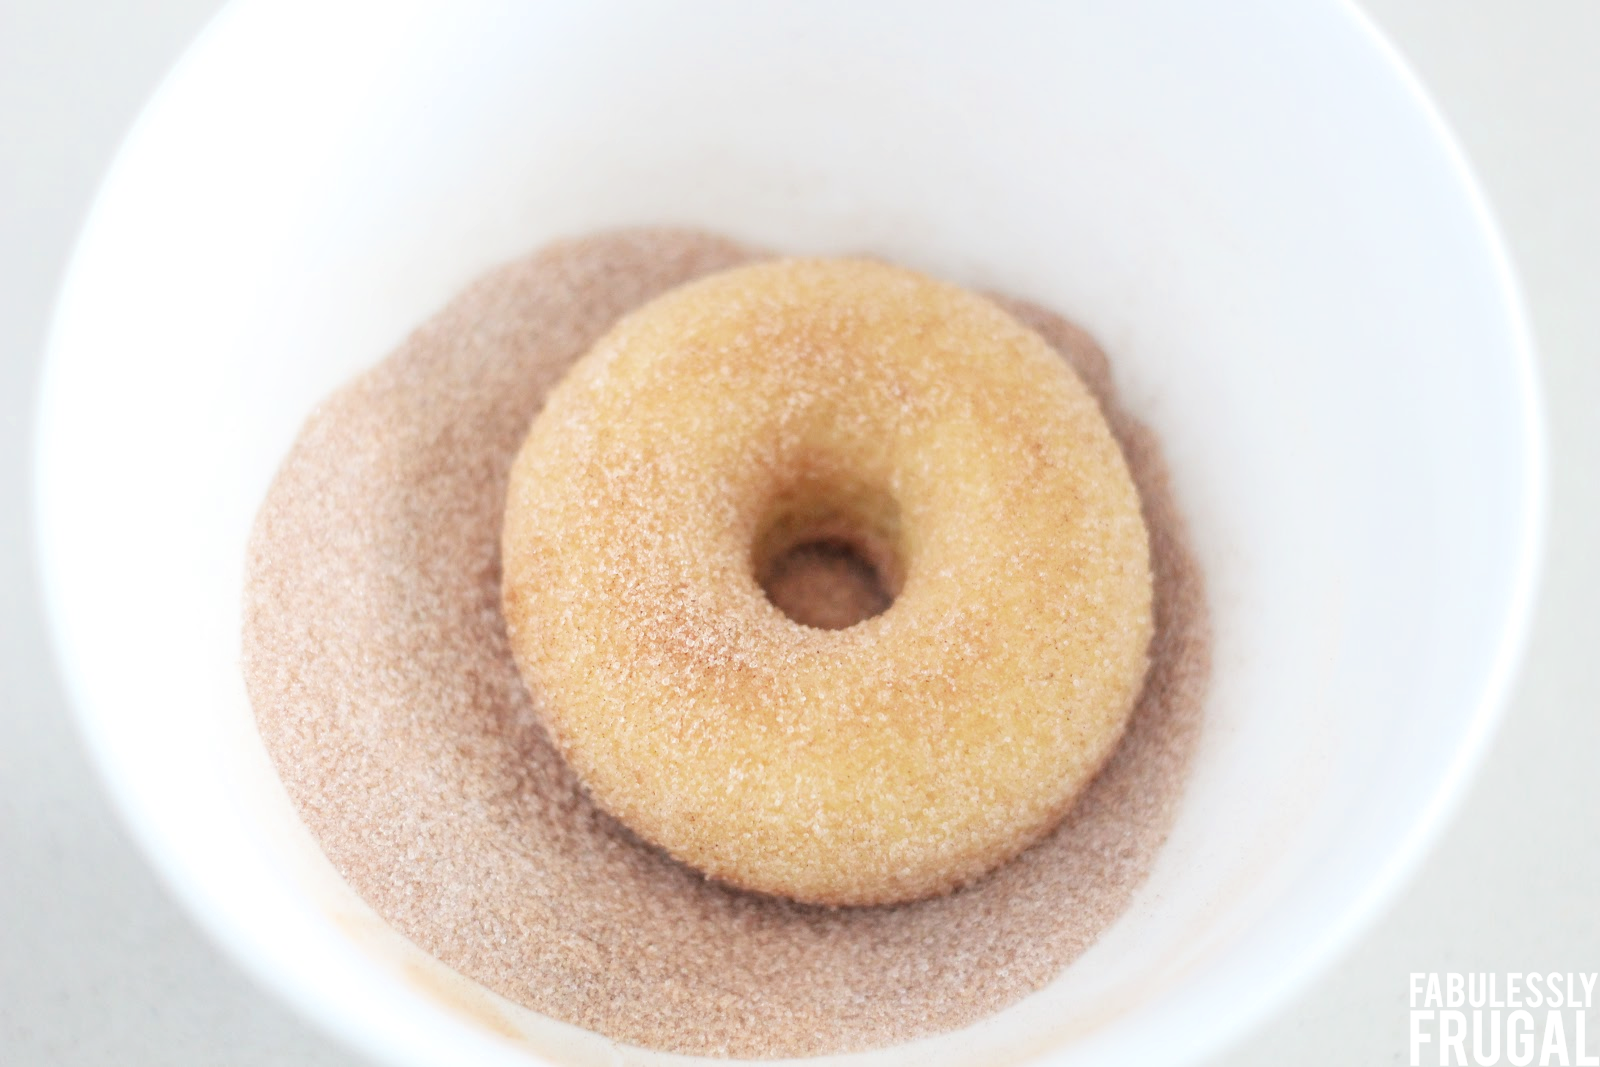 coat keto donuts in cinnamon and erythritol